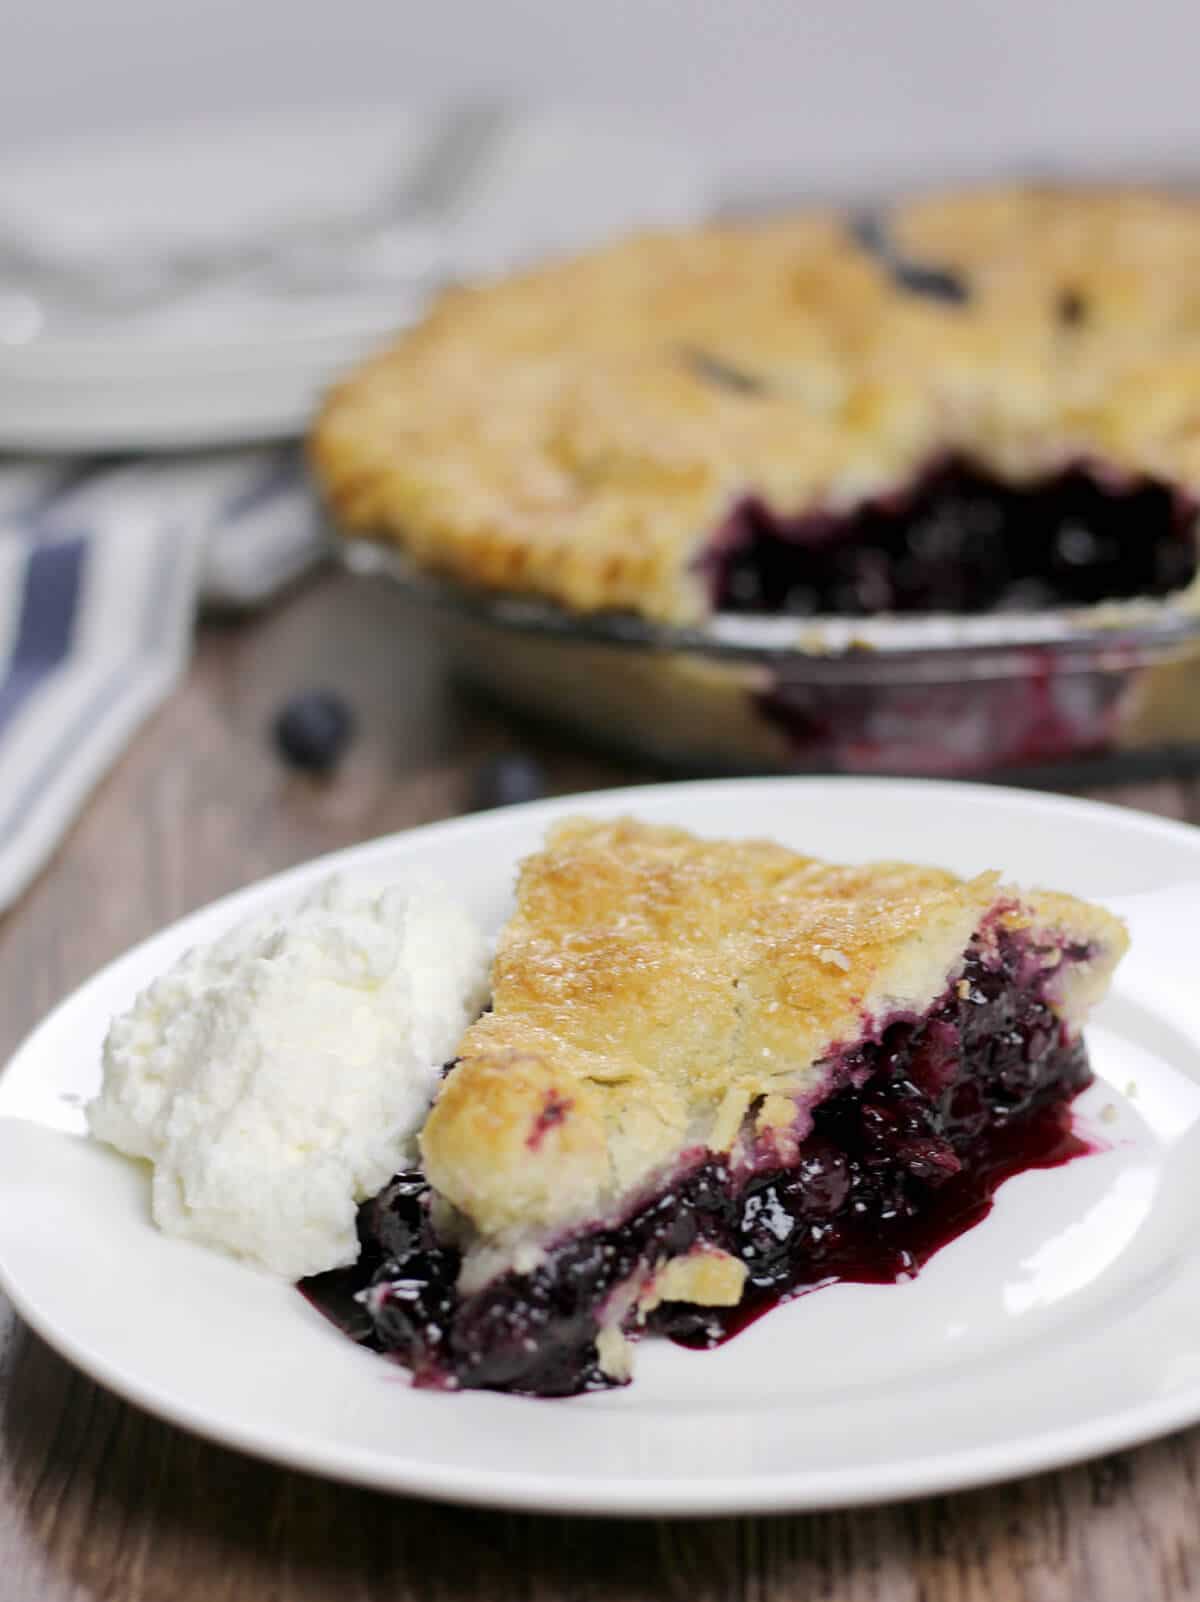 Homemade blueberry pie made with fresh blueberries is the perfect summer dessert!